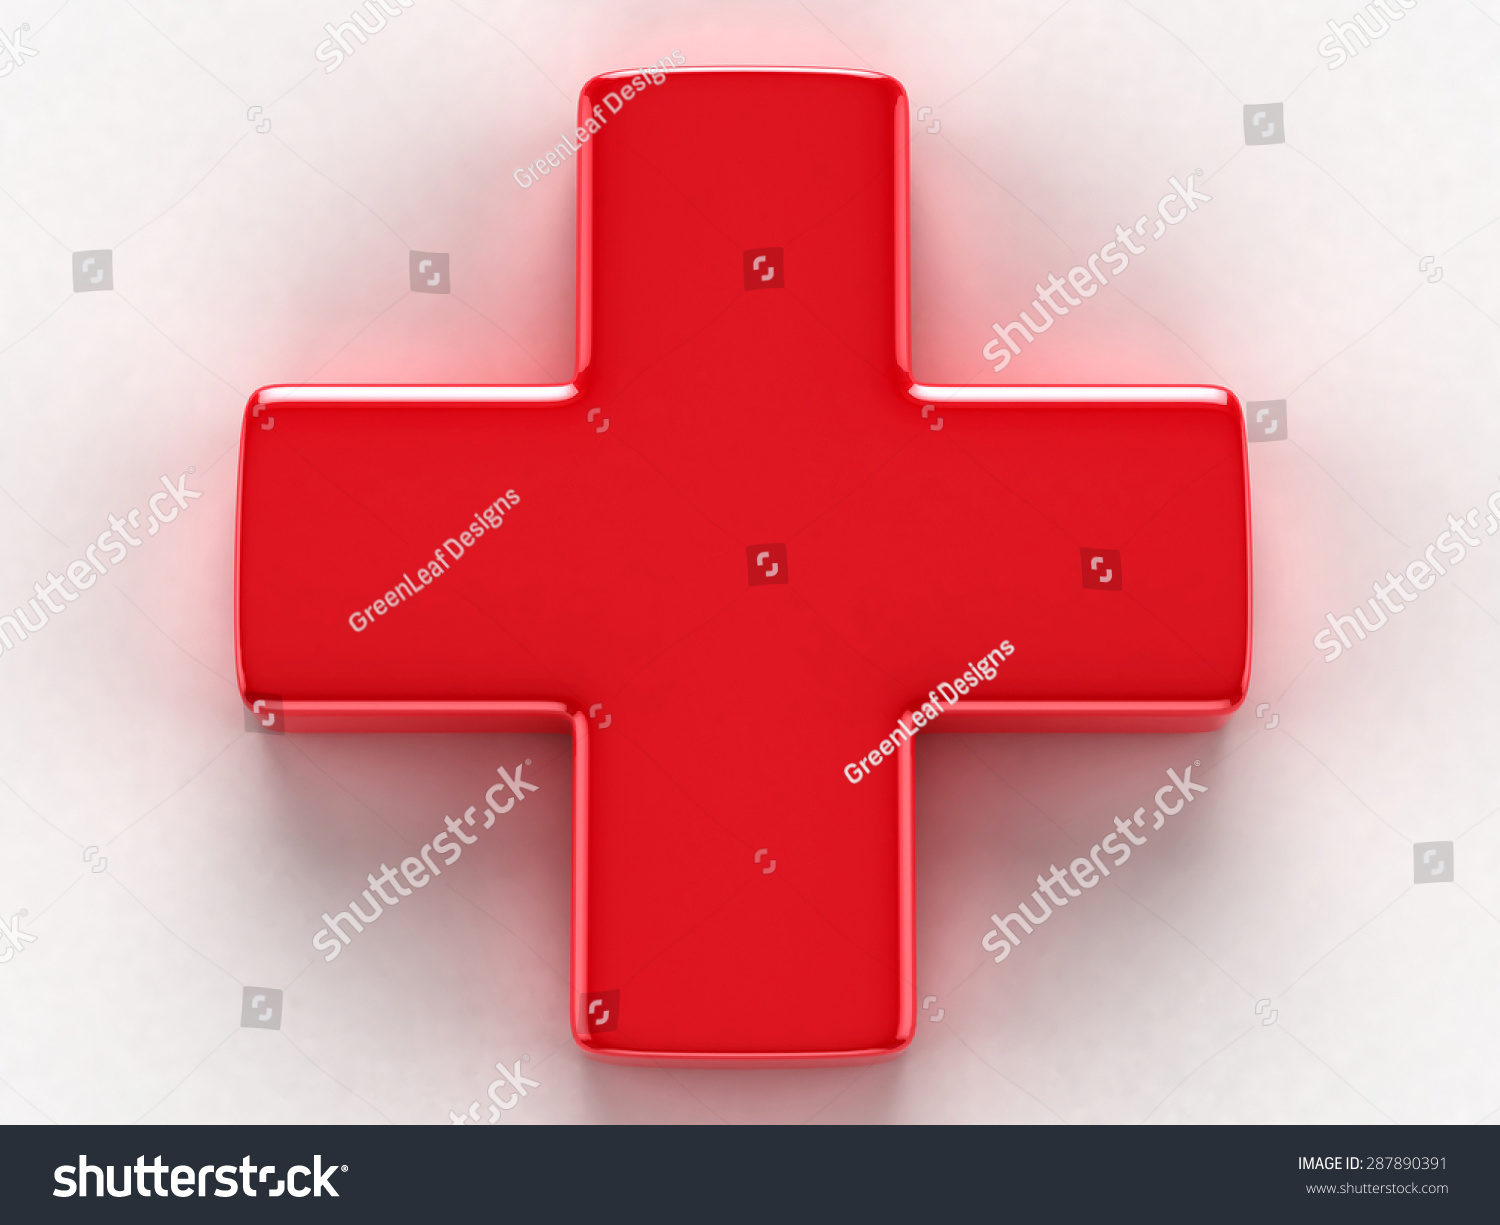 Red Plus Sign On White Background Stock Illustration 287890391 ...